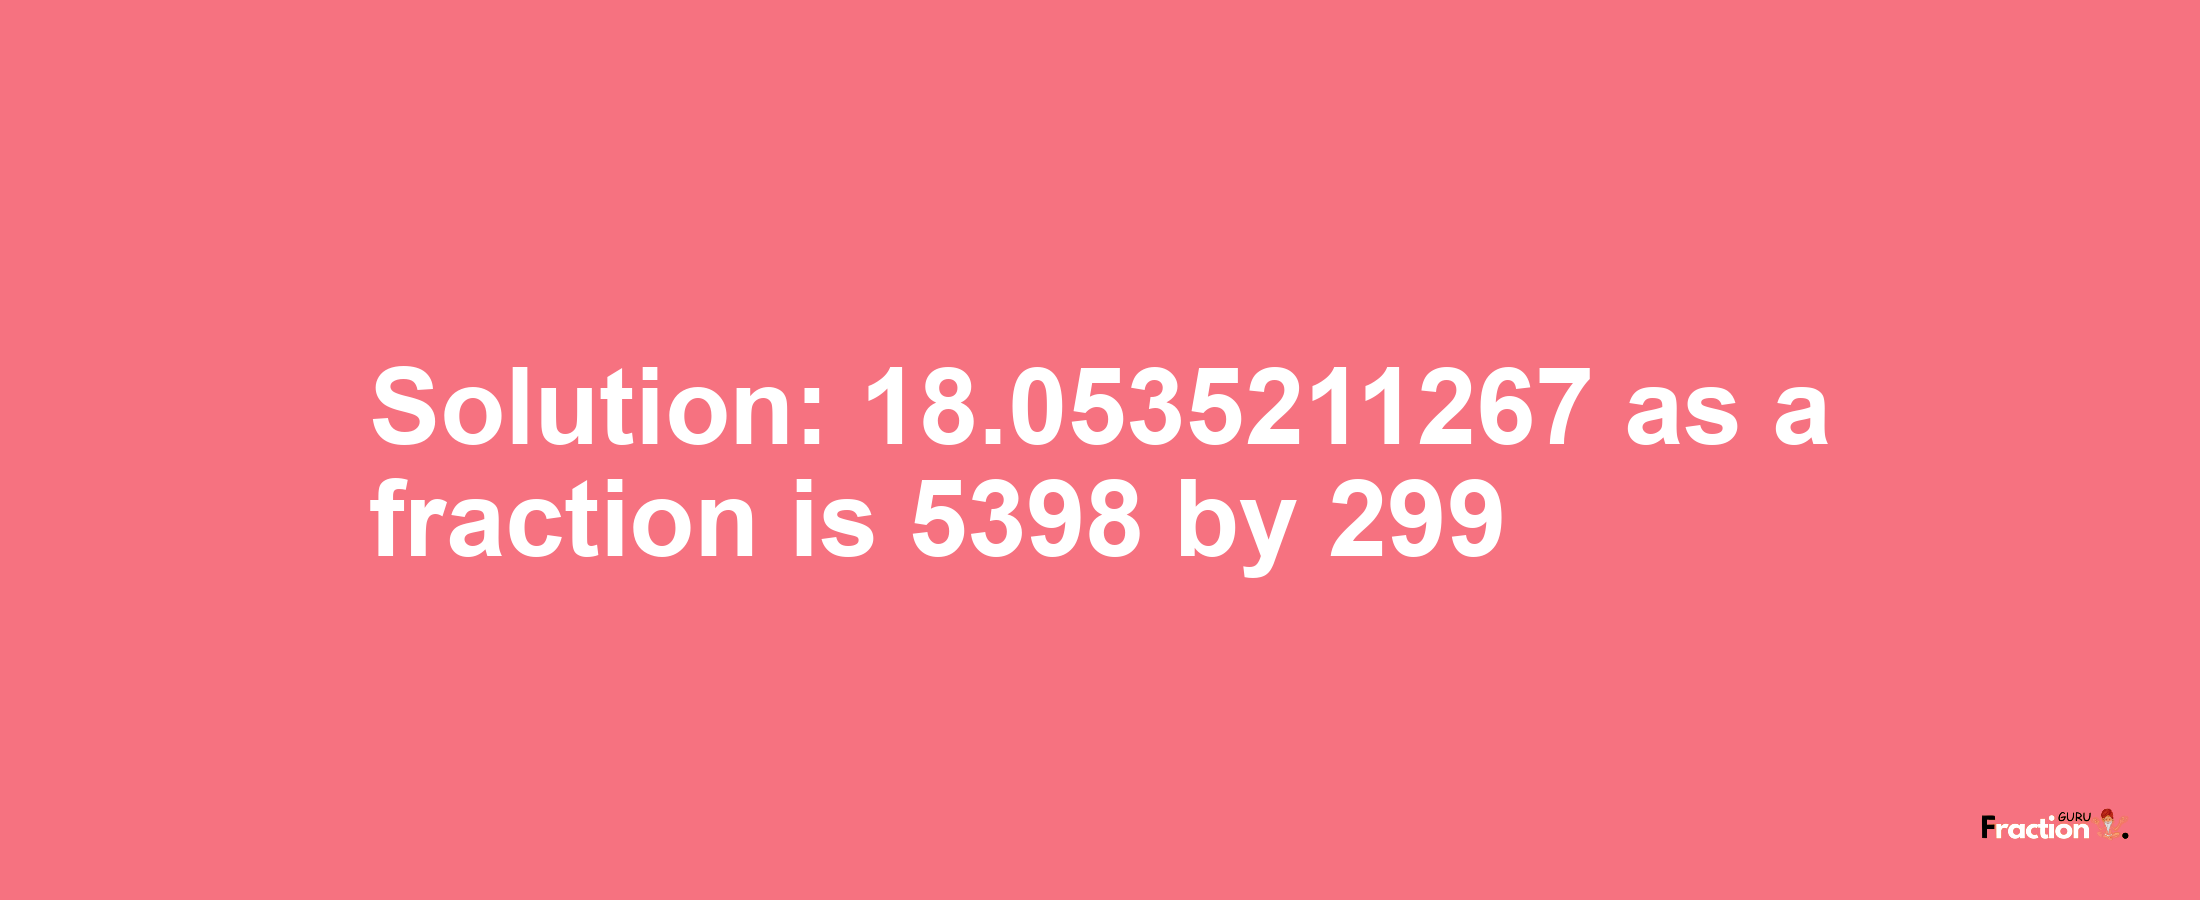 Solution:18.0535211267 as a fraction is 5398/299